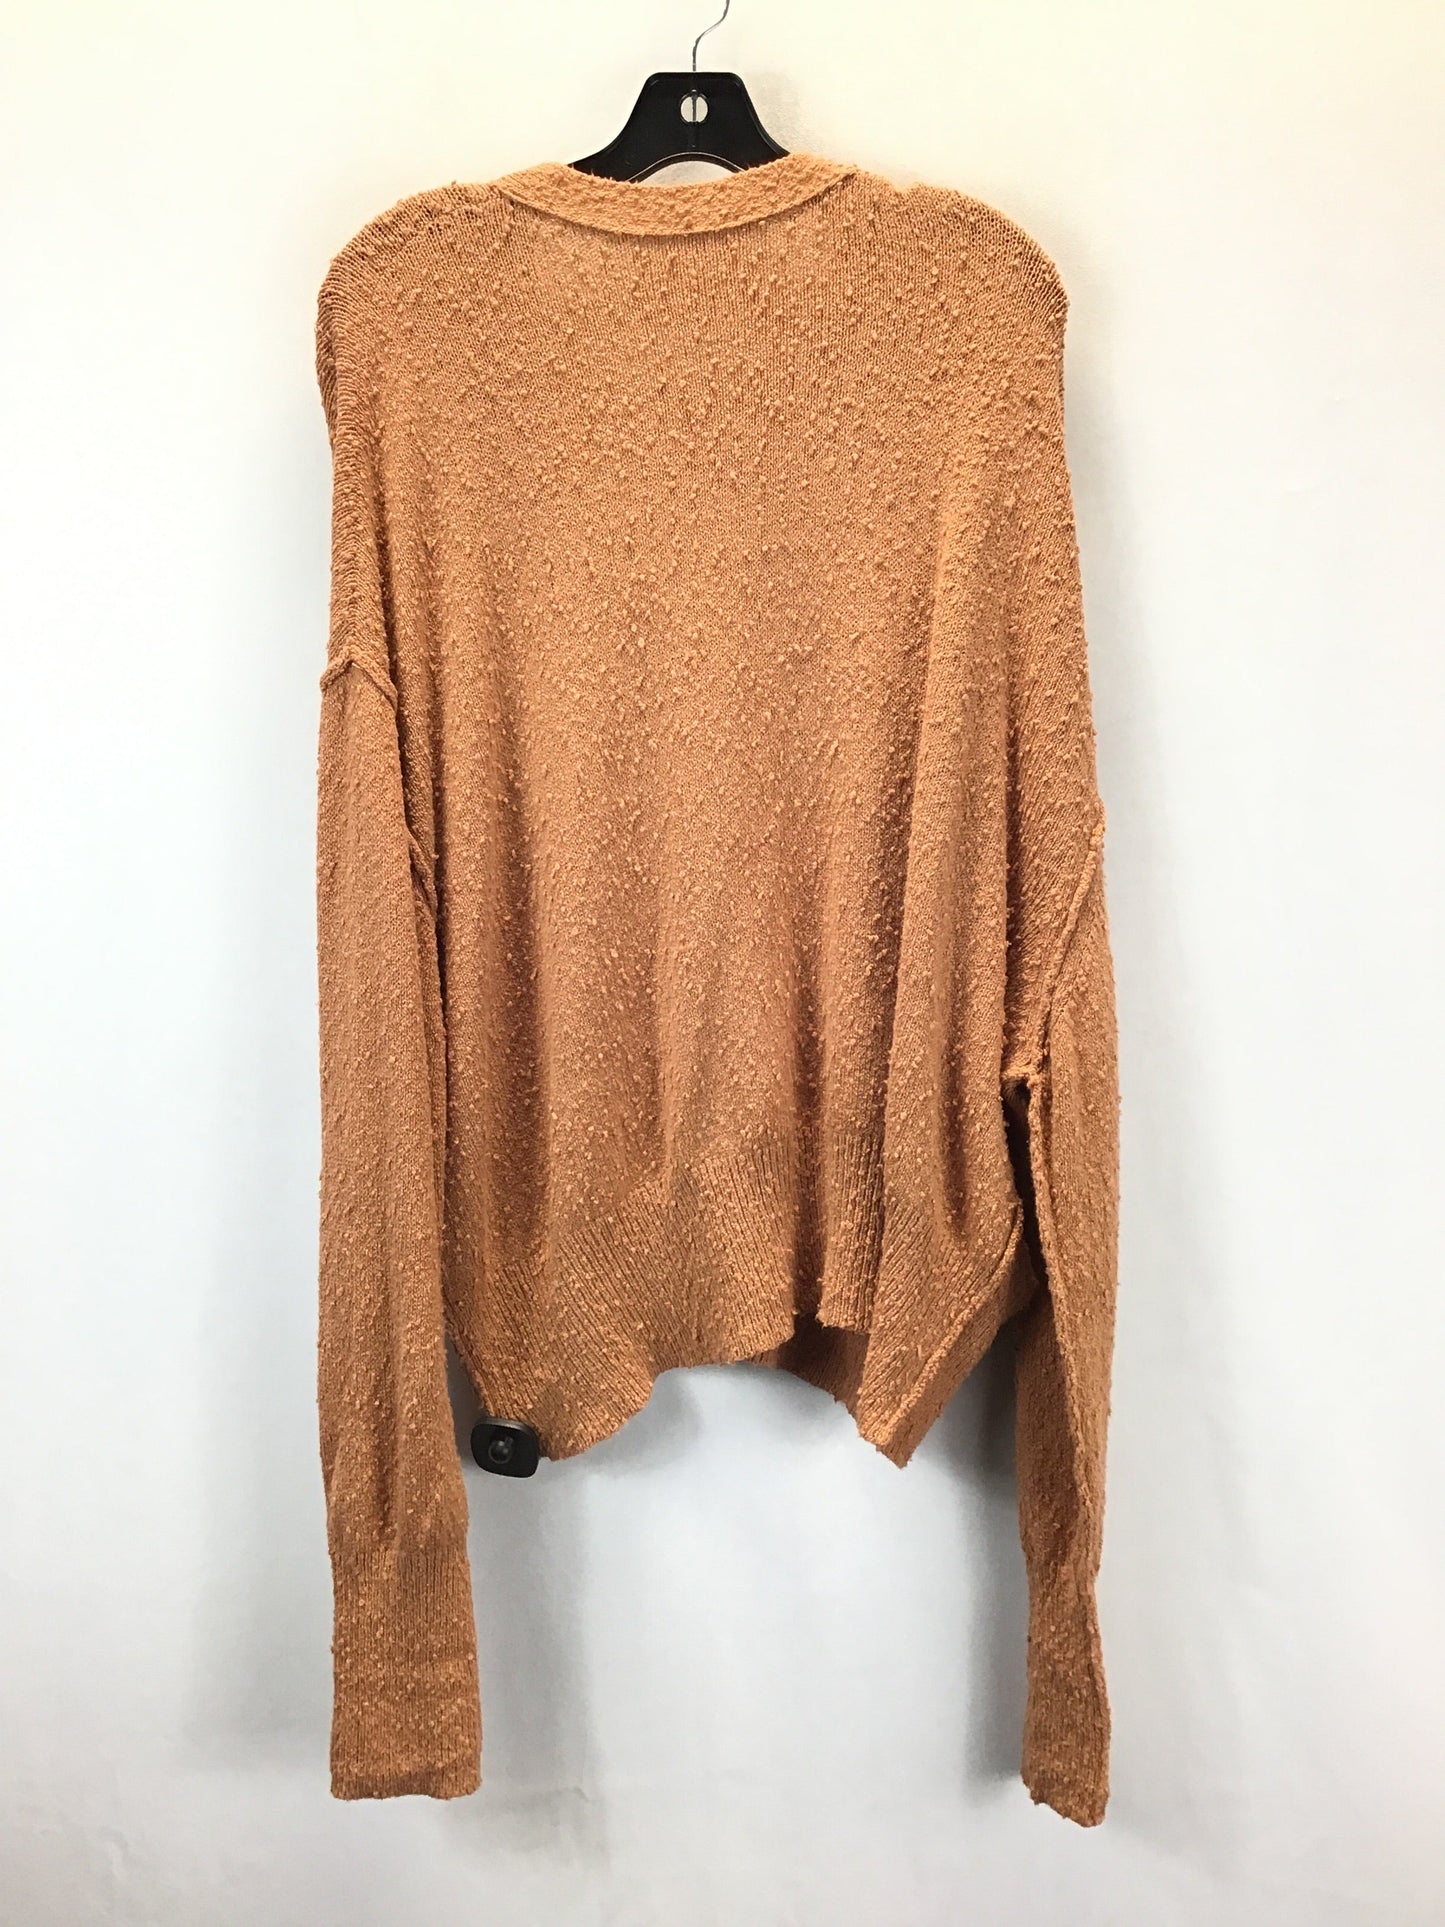 Sweater Cardigan By Free People  Size: M